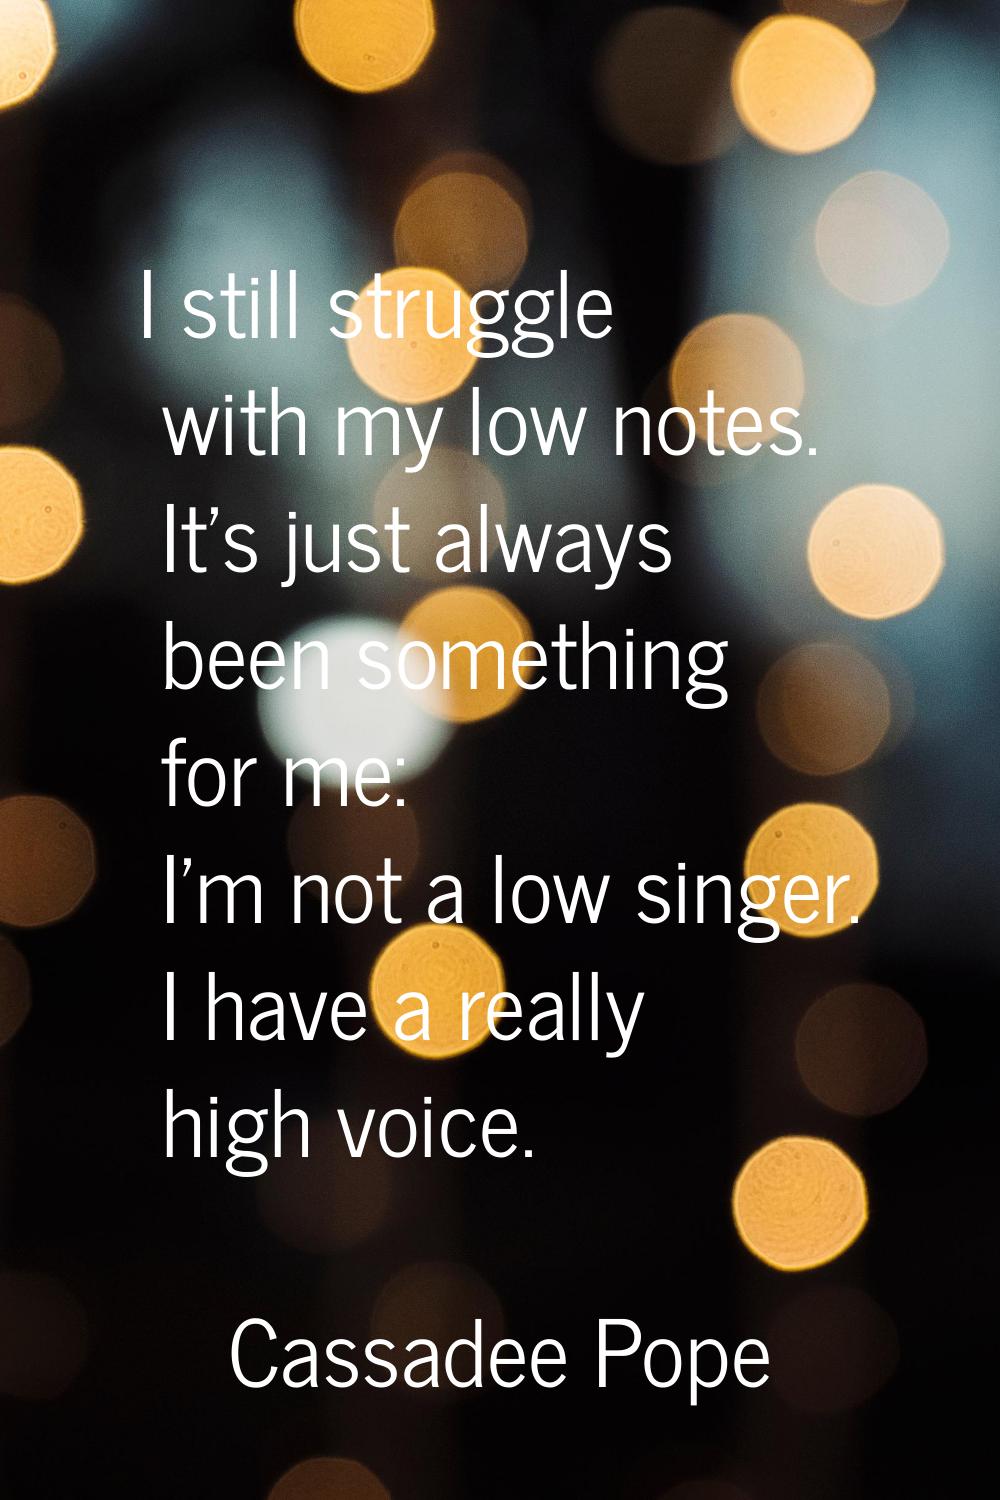 I still struggle with my low notes. It's just always been something for me: I'm not a low singer. I